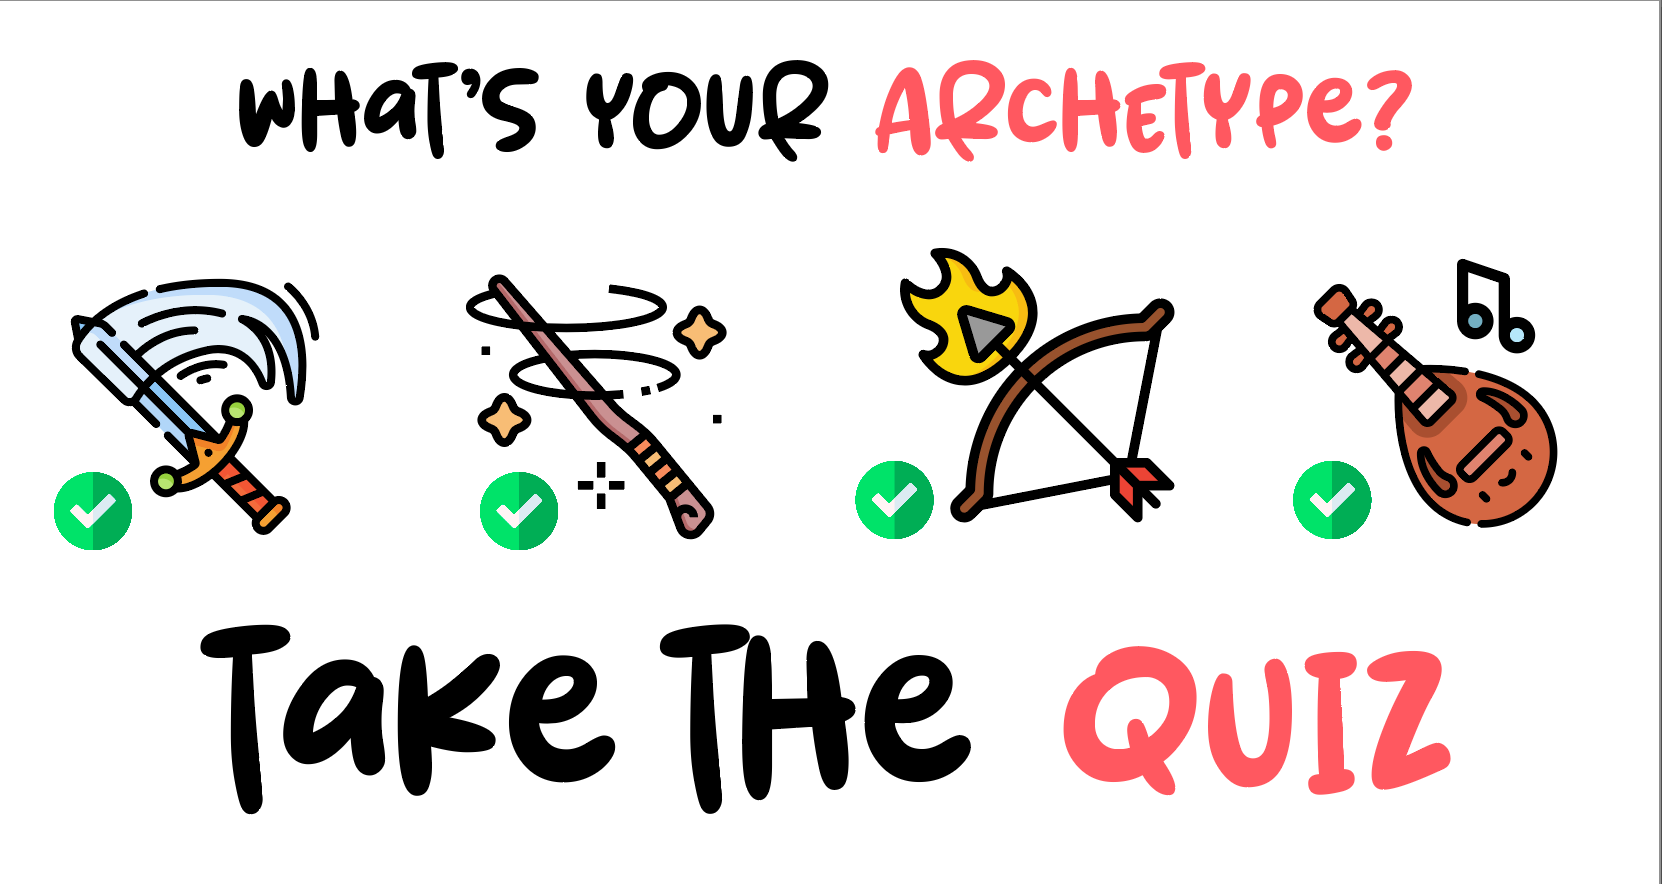 "What's your archetype?" Four images: sword, wand, bow, and lute. "Take the quiz"